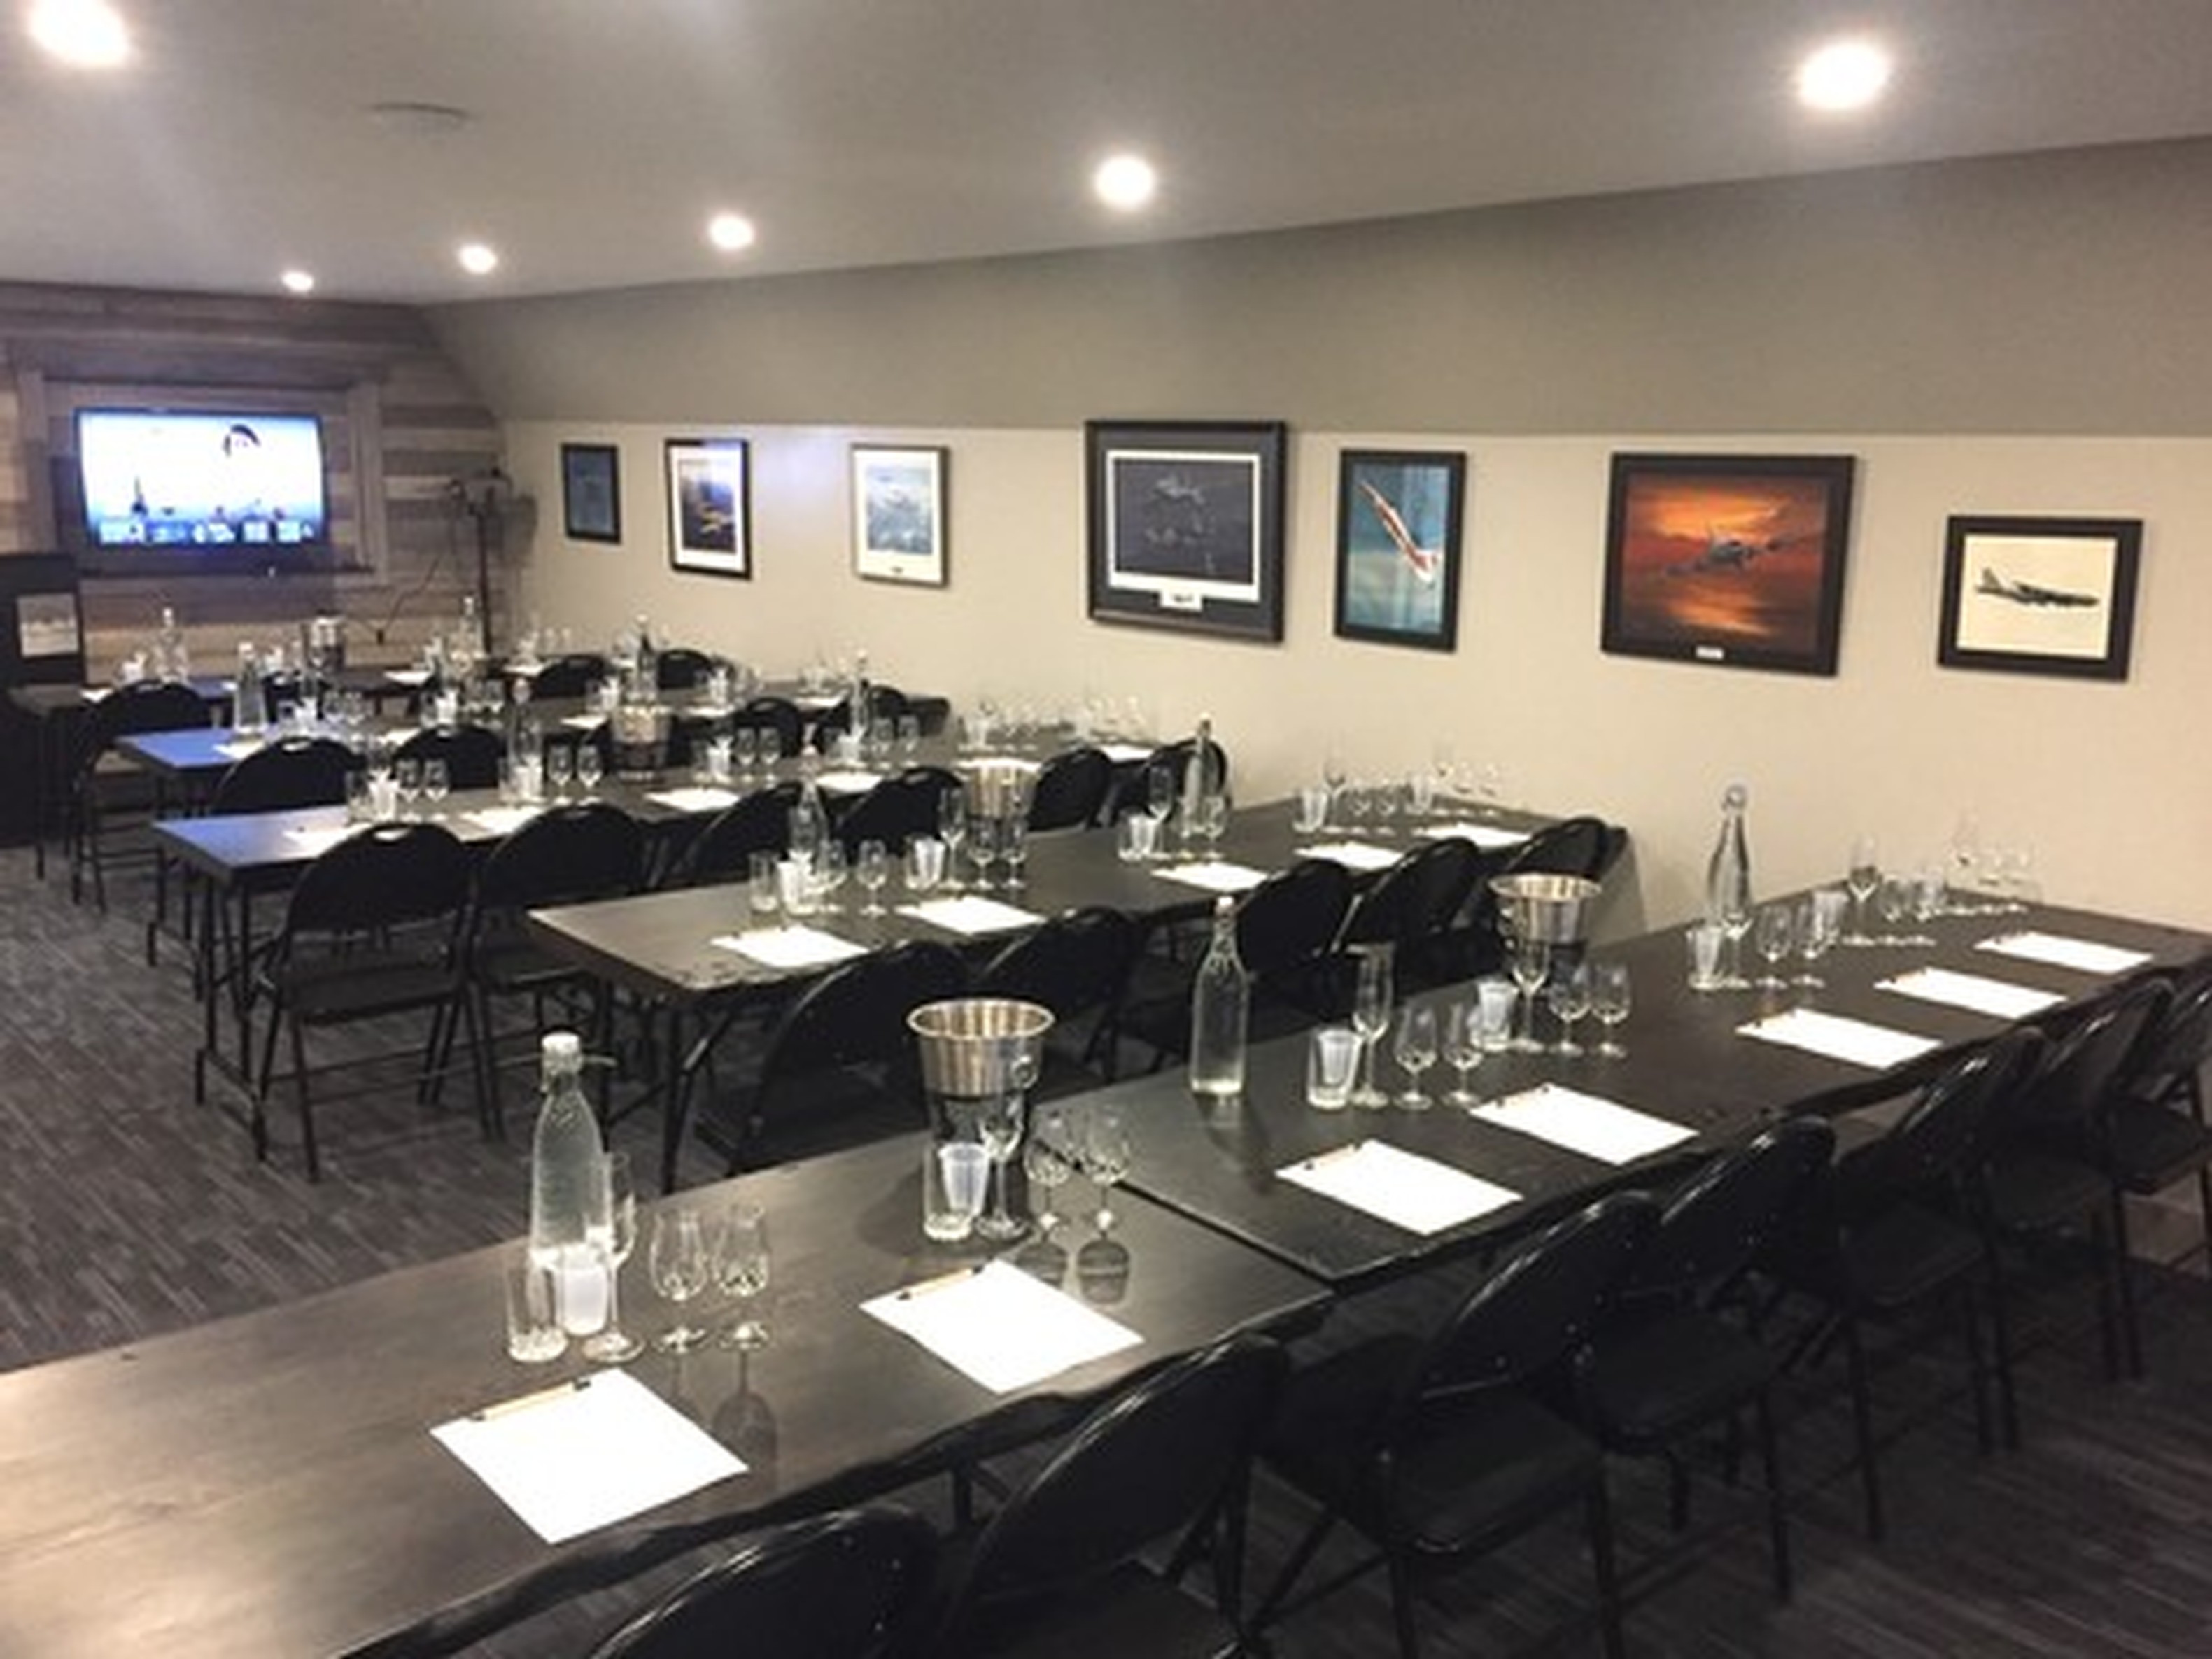 image of tables in a row setup for 40 Knots wine classes.